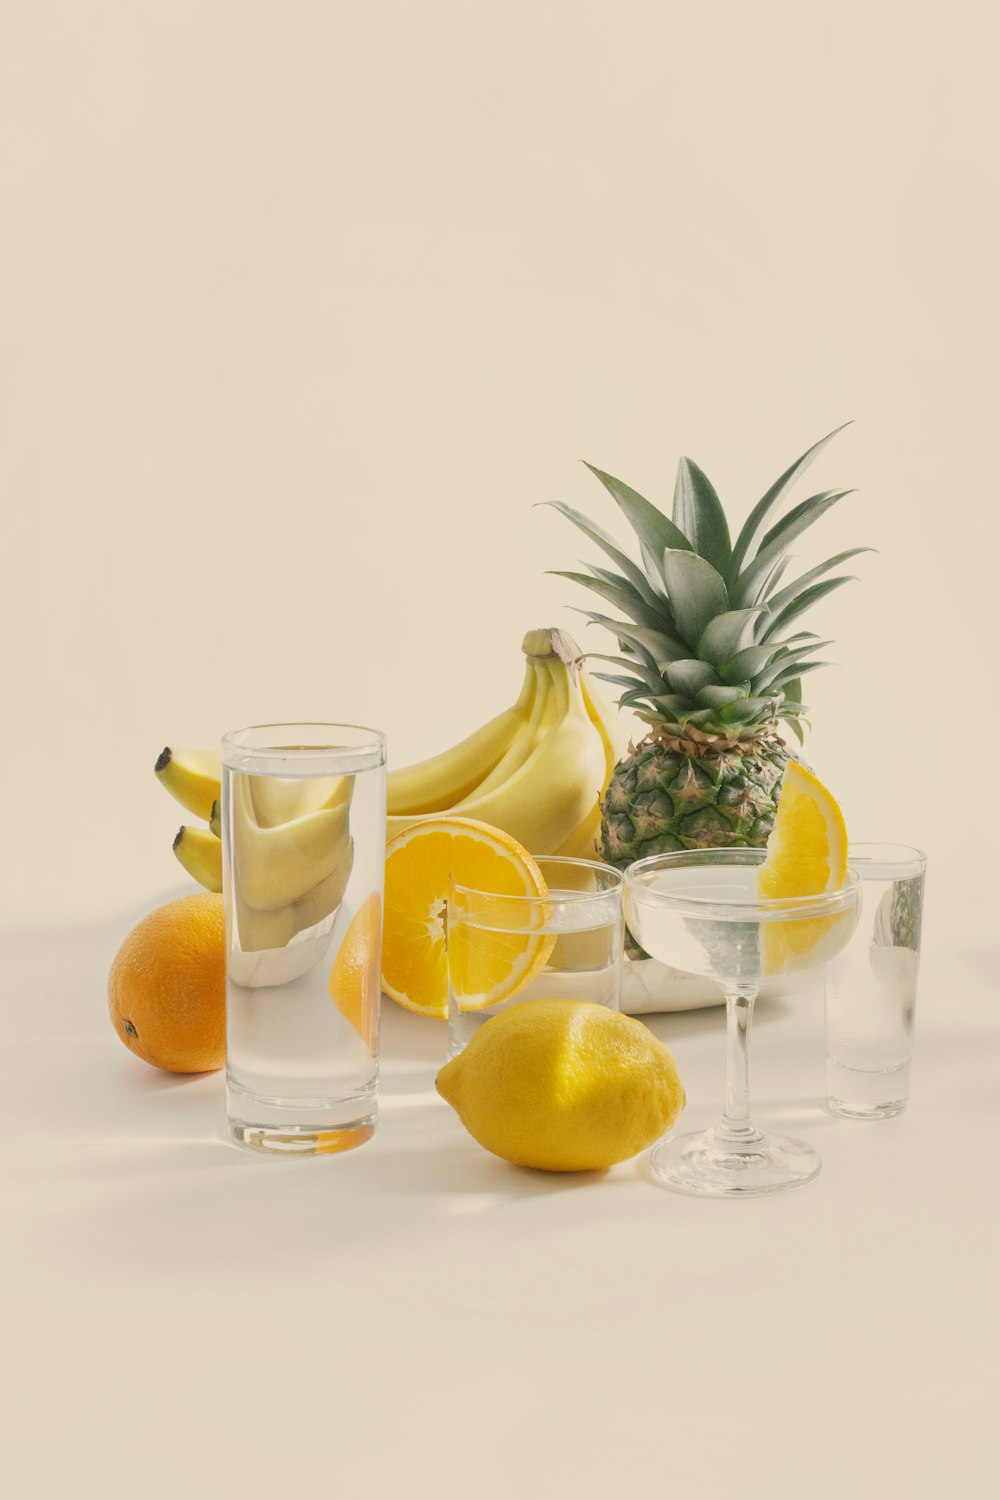 sliced lemon and clear drinking glass with sliced lemon